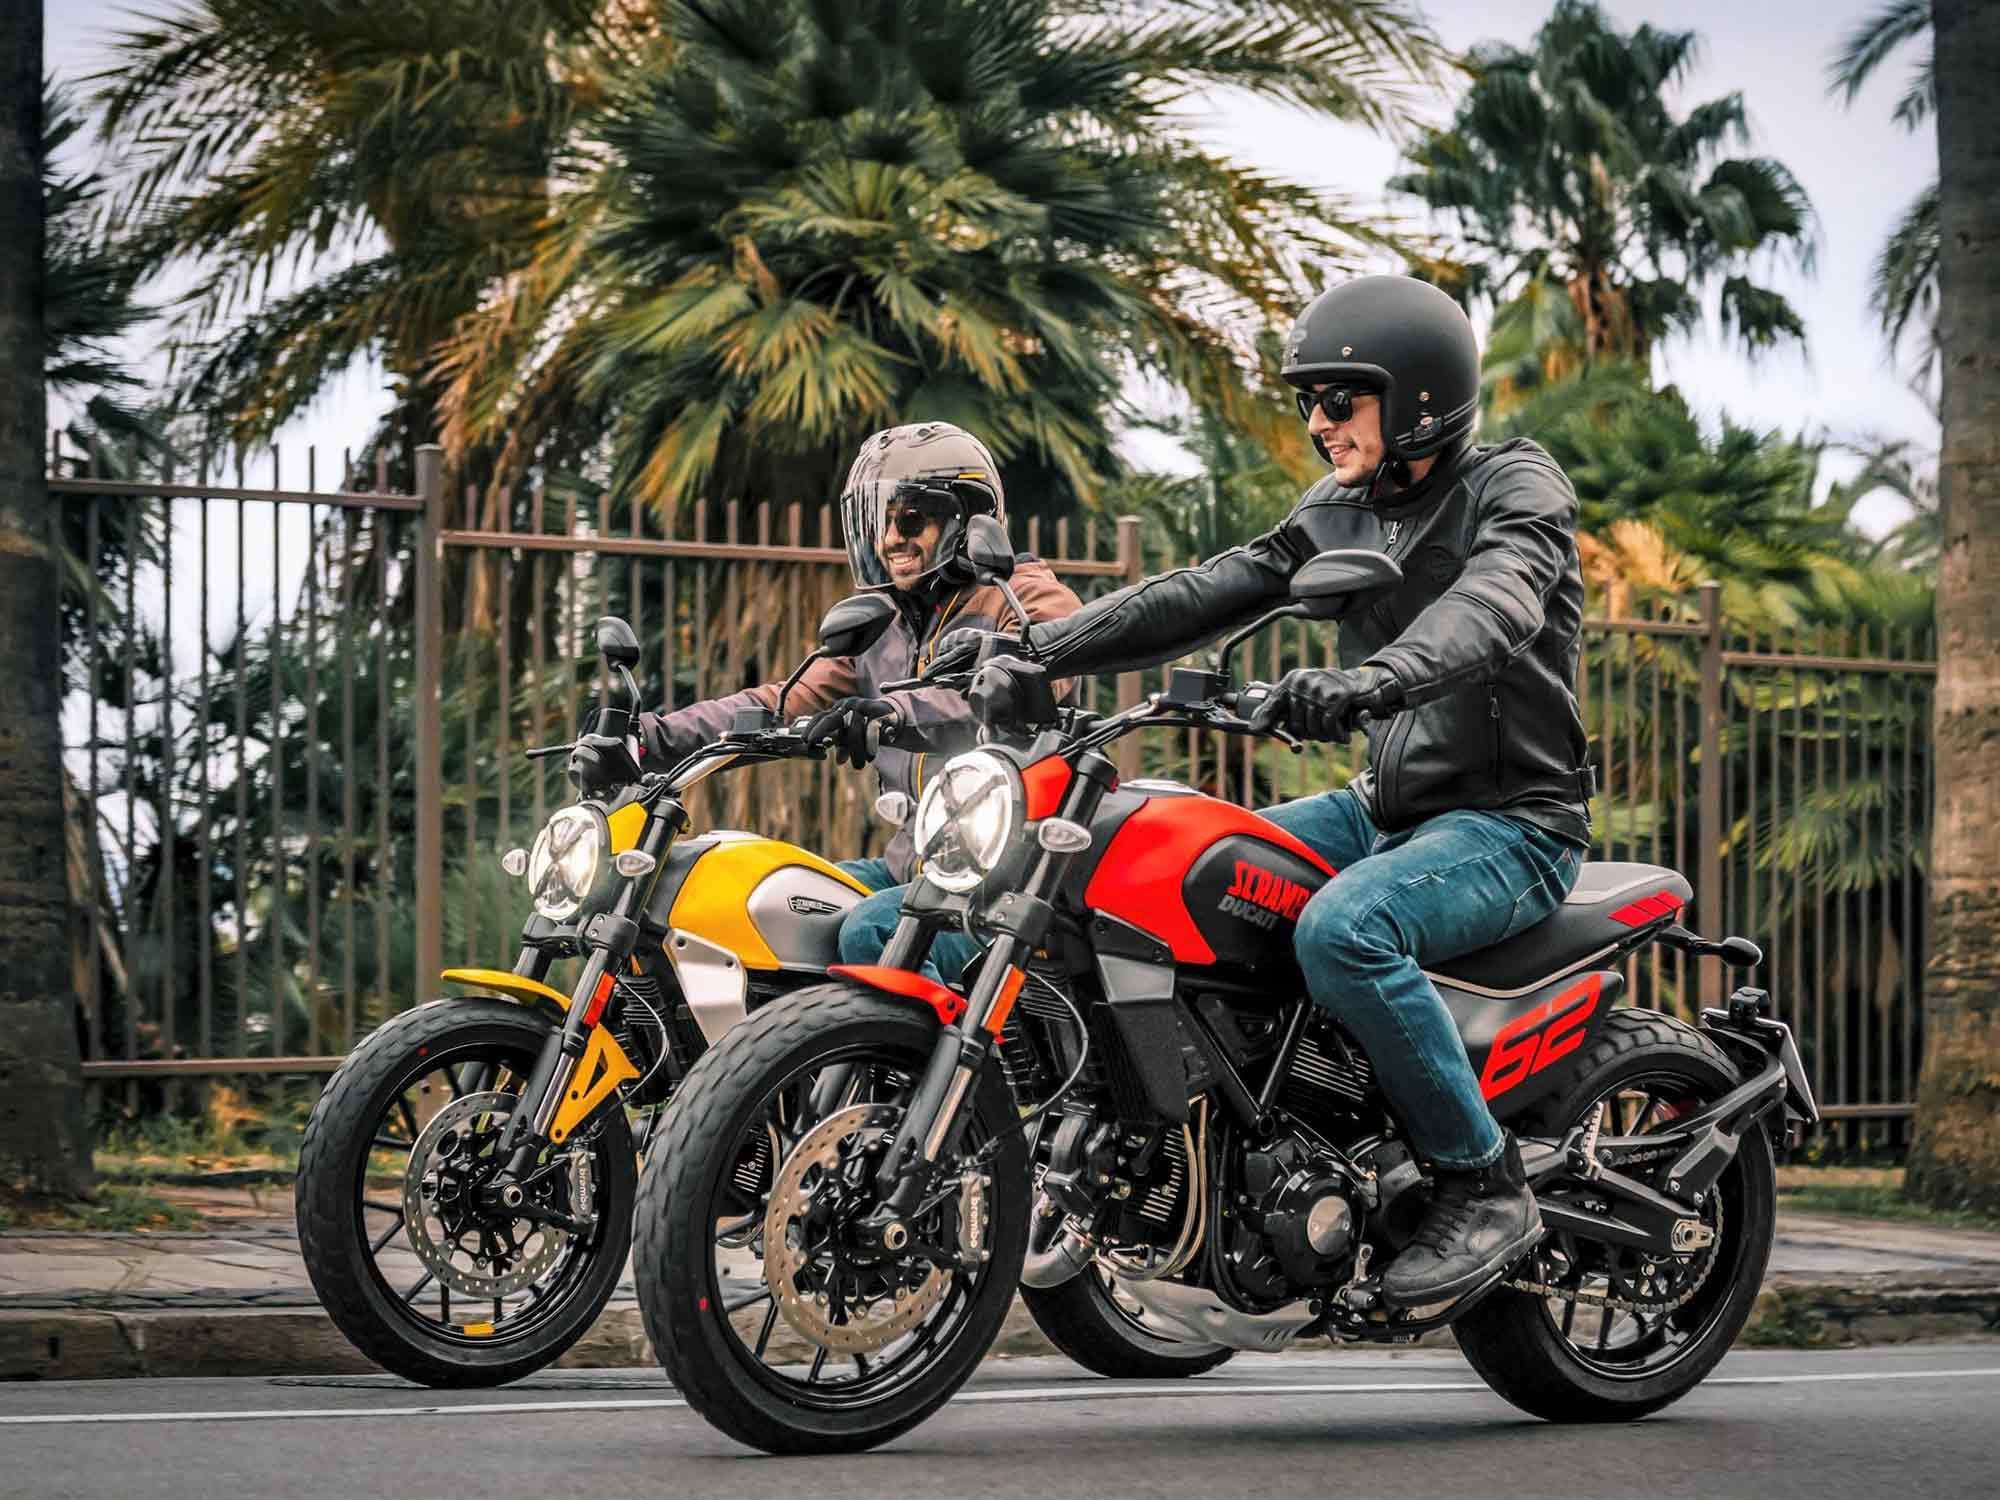 Ducati’s 800cc Scrambler family gets a series of substantial updates for the 2023 model year.